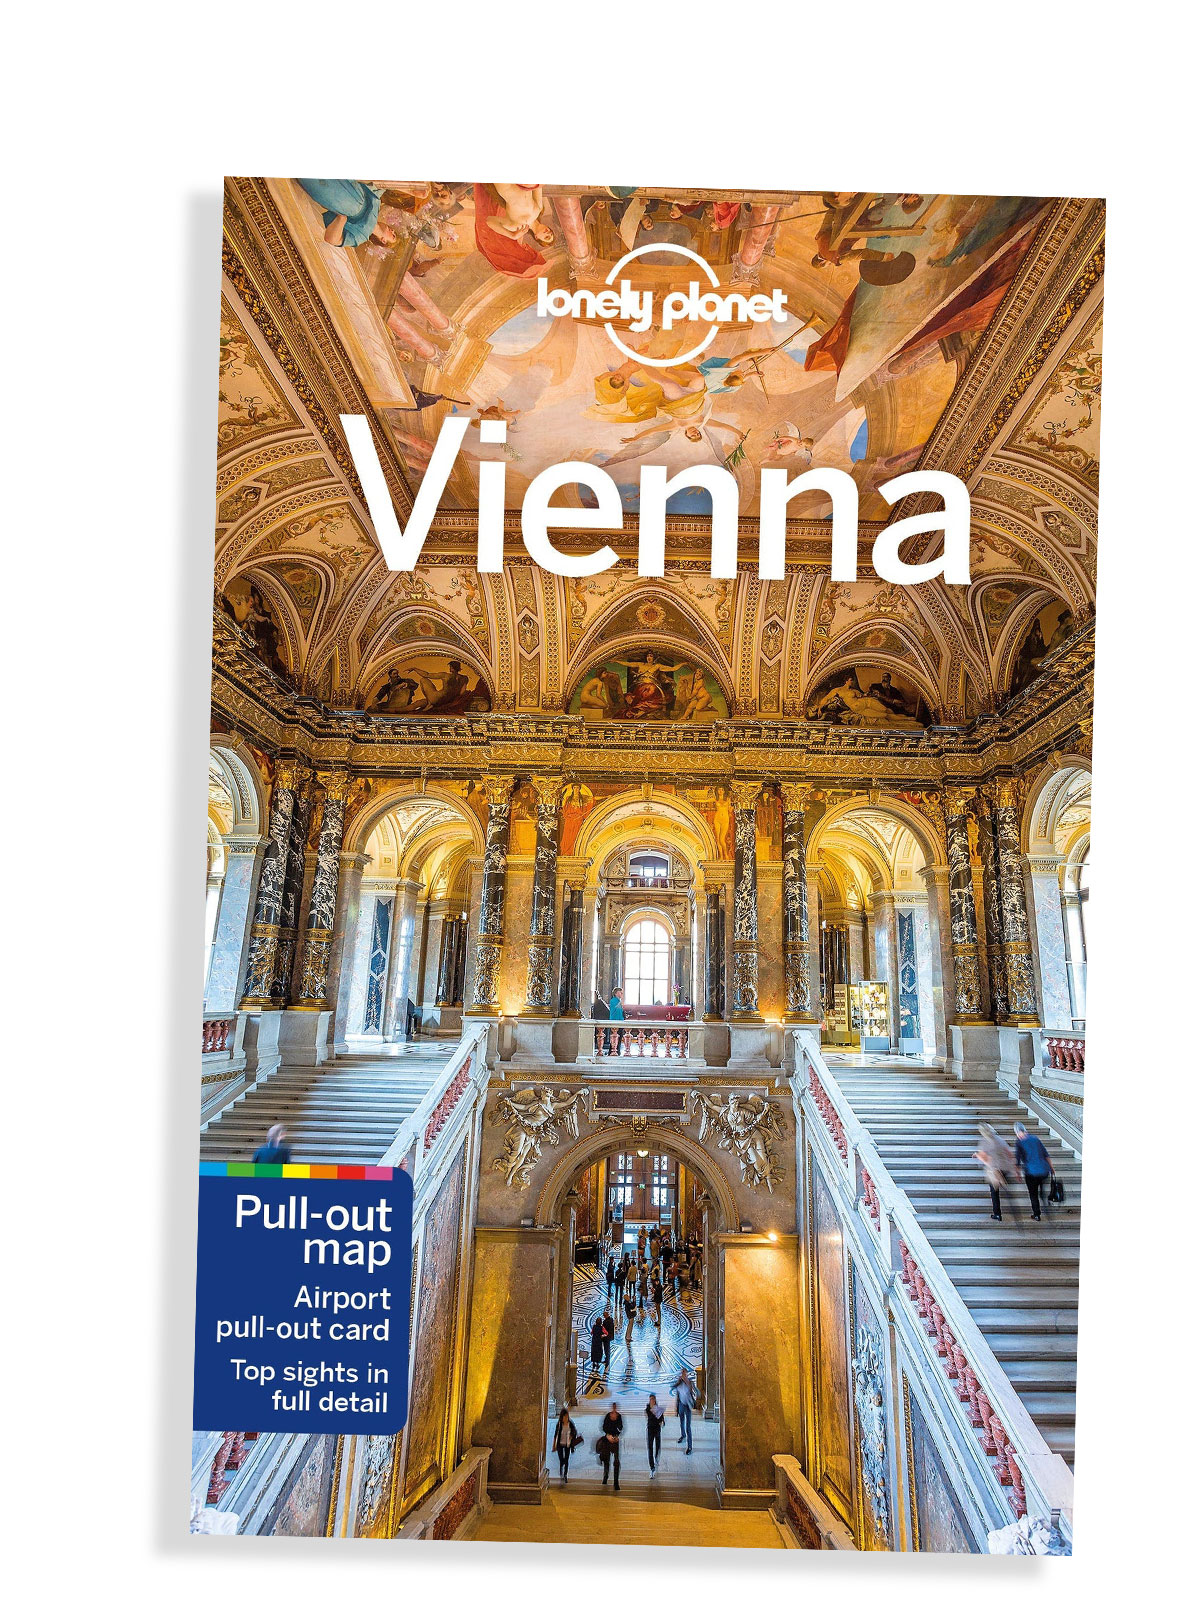 Vienna Lonely Planet